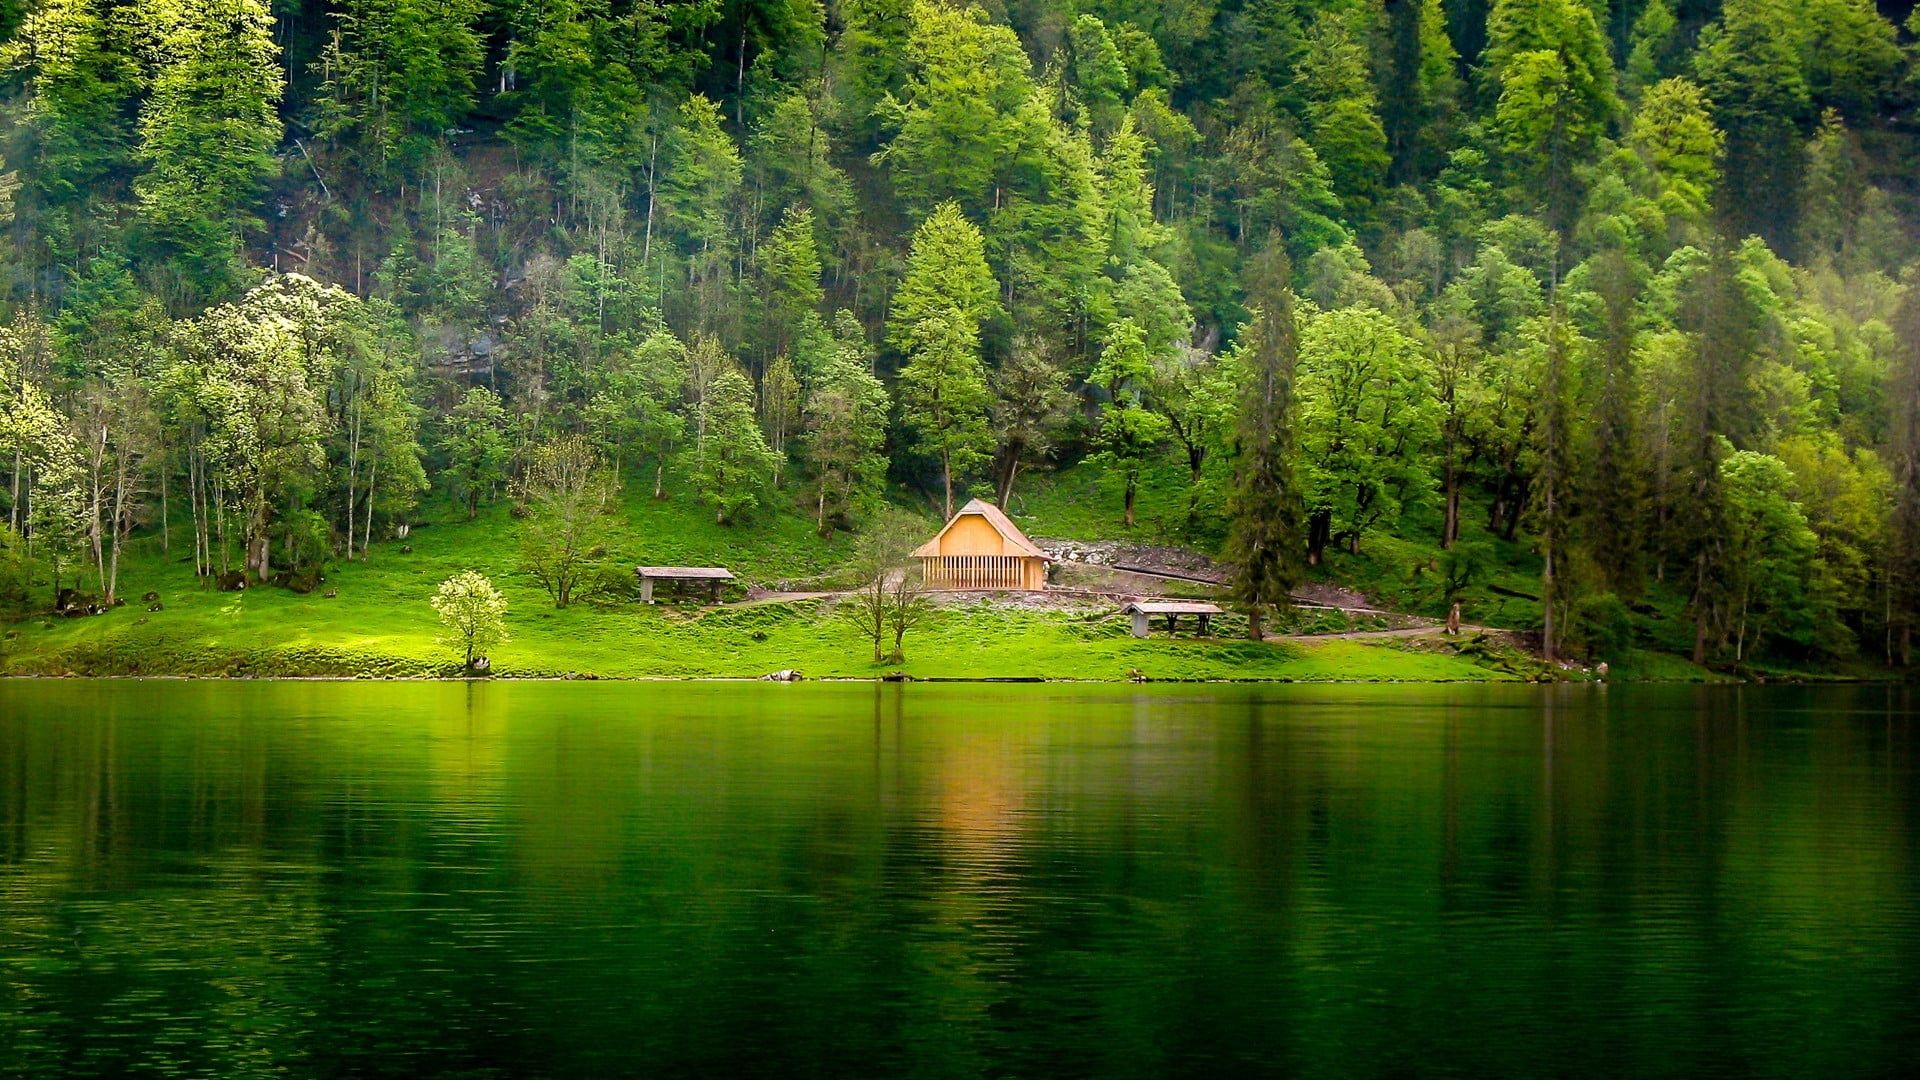 A house on a green island in the middle of a lake surrounded by trees. - Lake